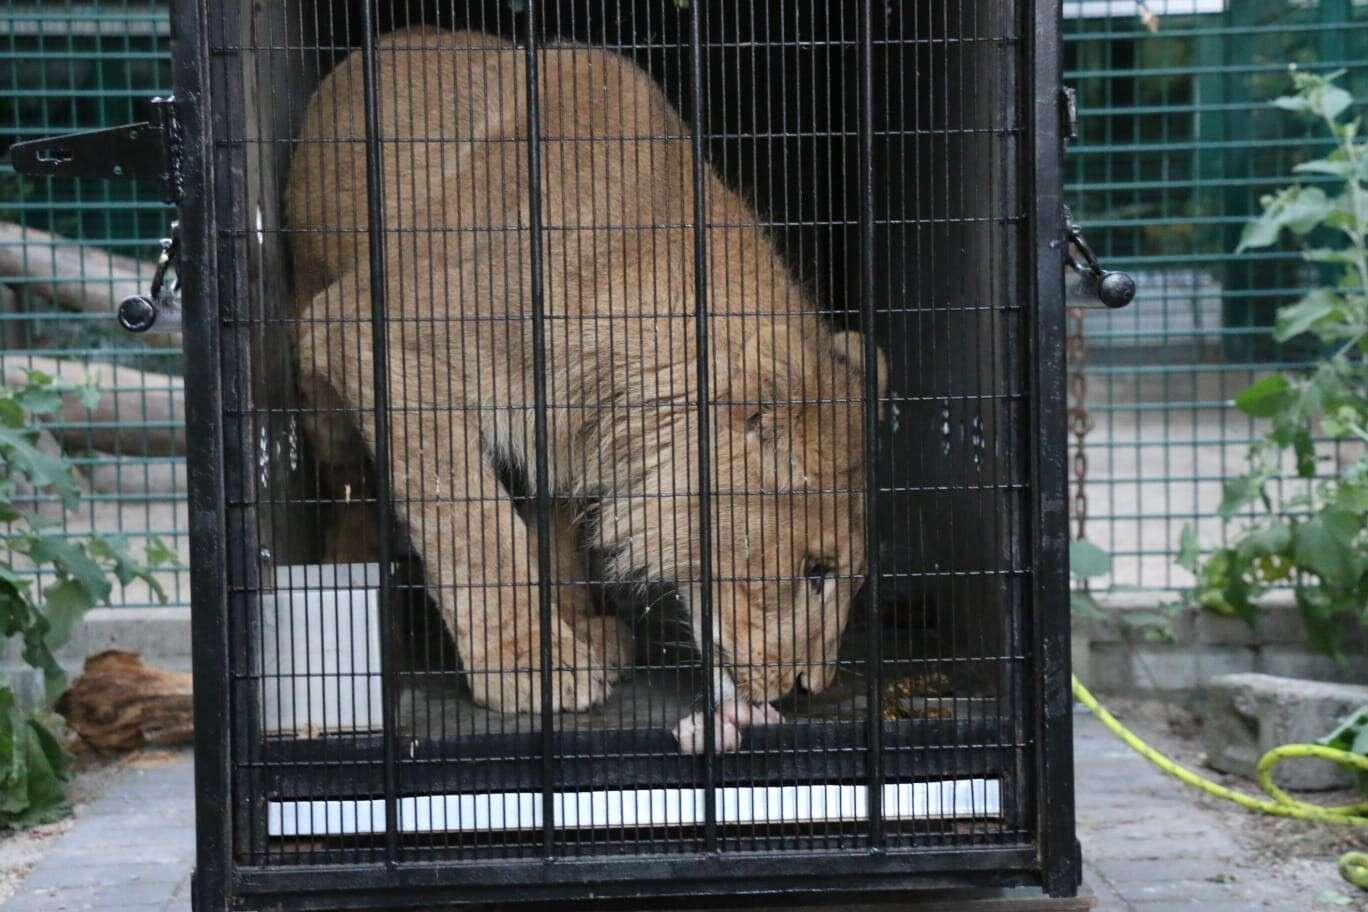 Lion saved from Paris suburb